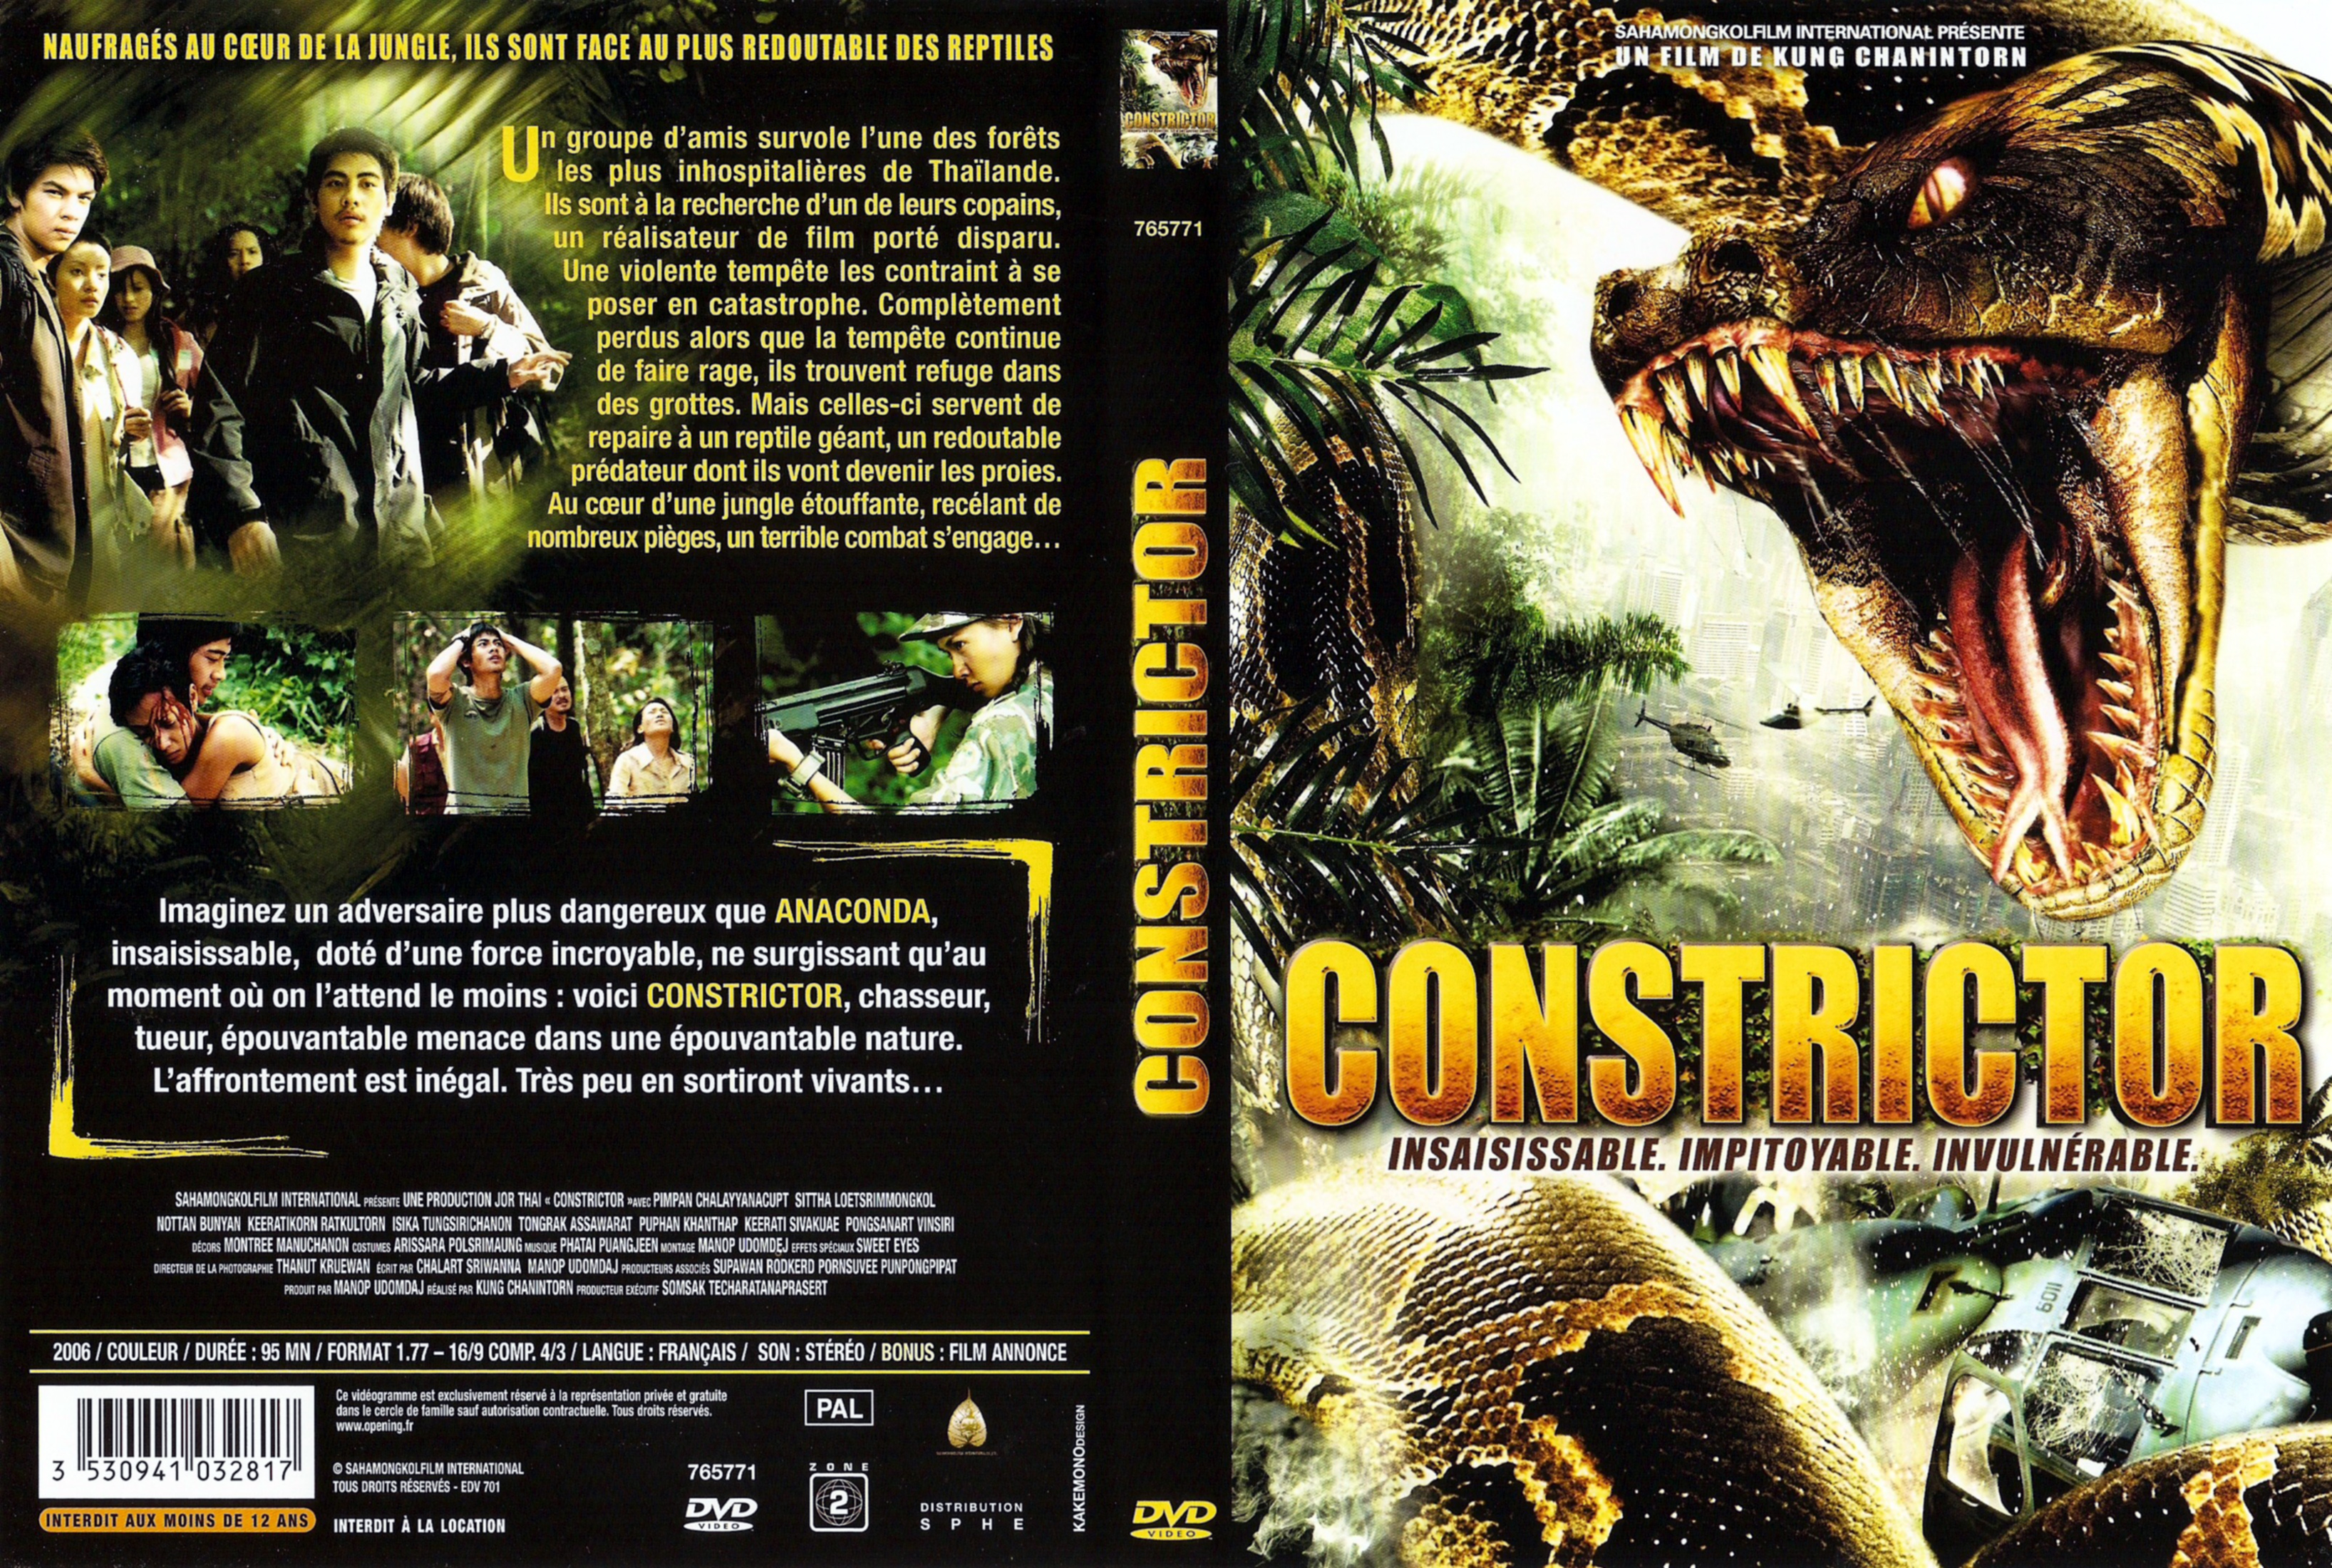 Jaquette DVD Constrictor